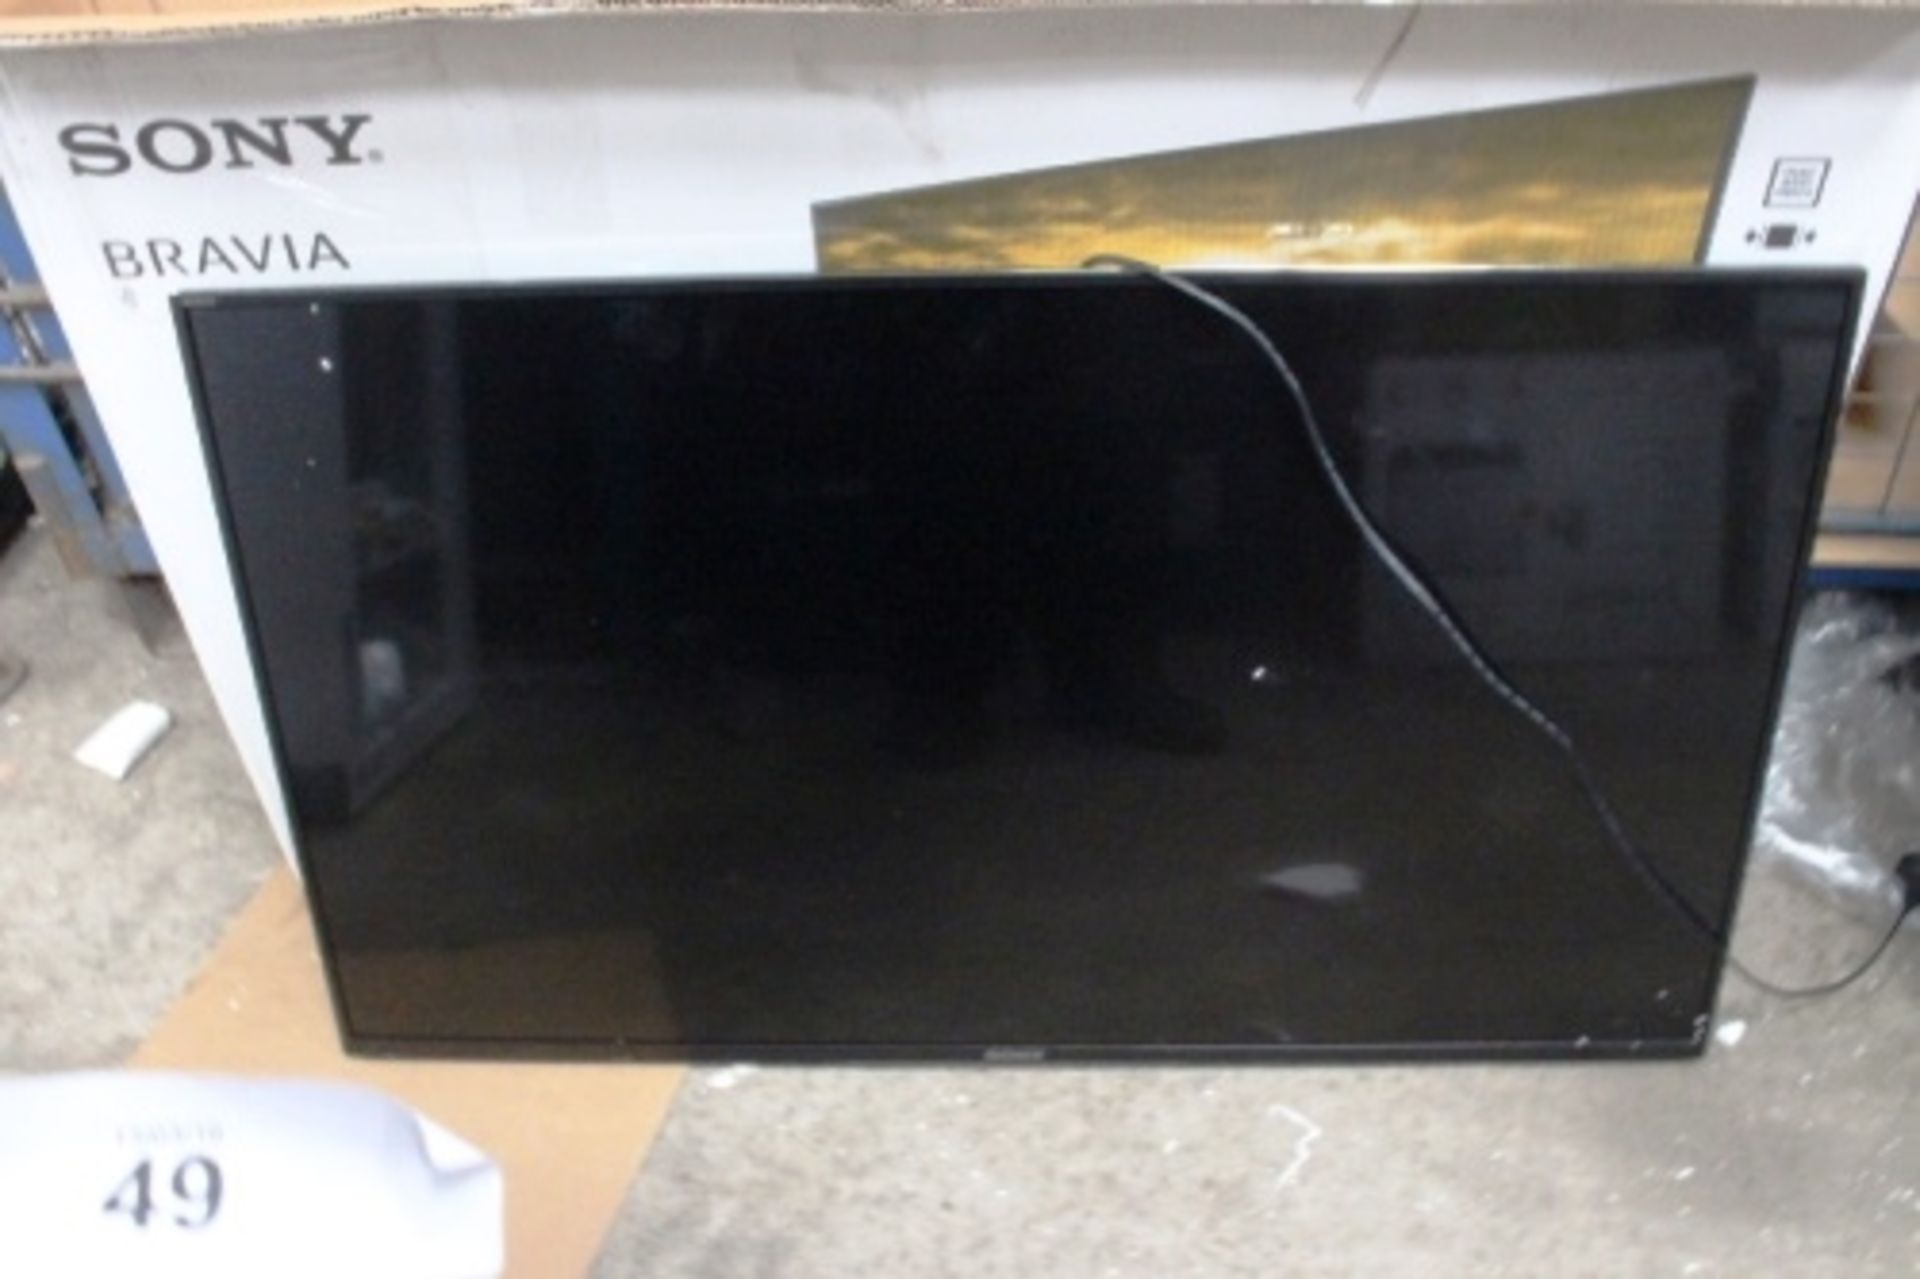 A Sony Bravia 43" TV, XD83, screen only, no legs or accessories, faulty power supply module, does